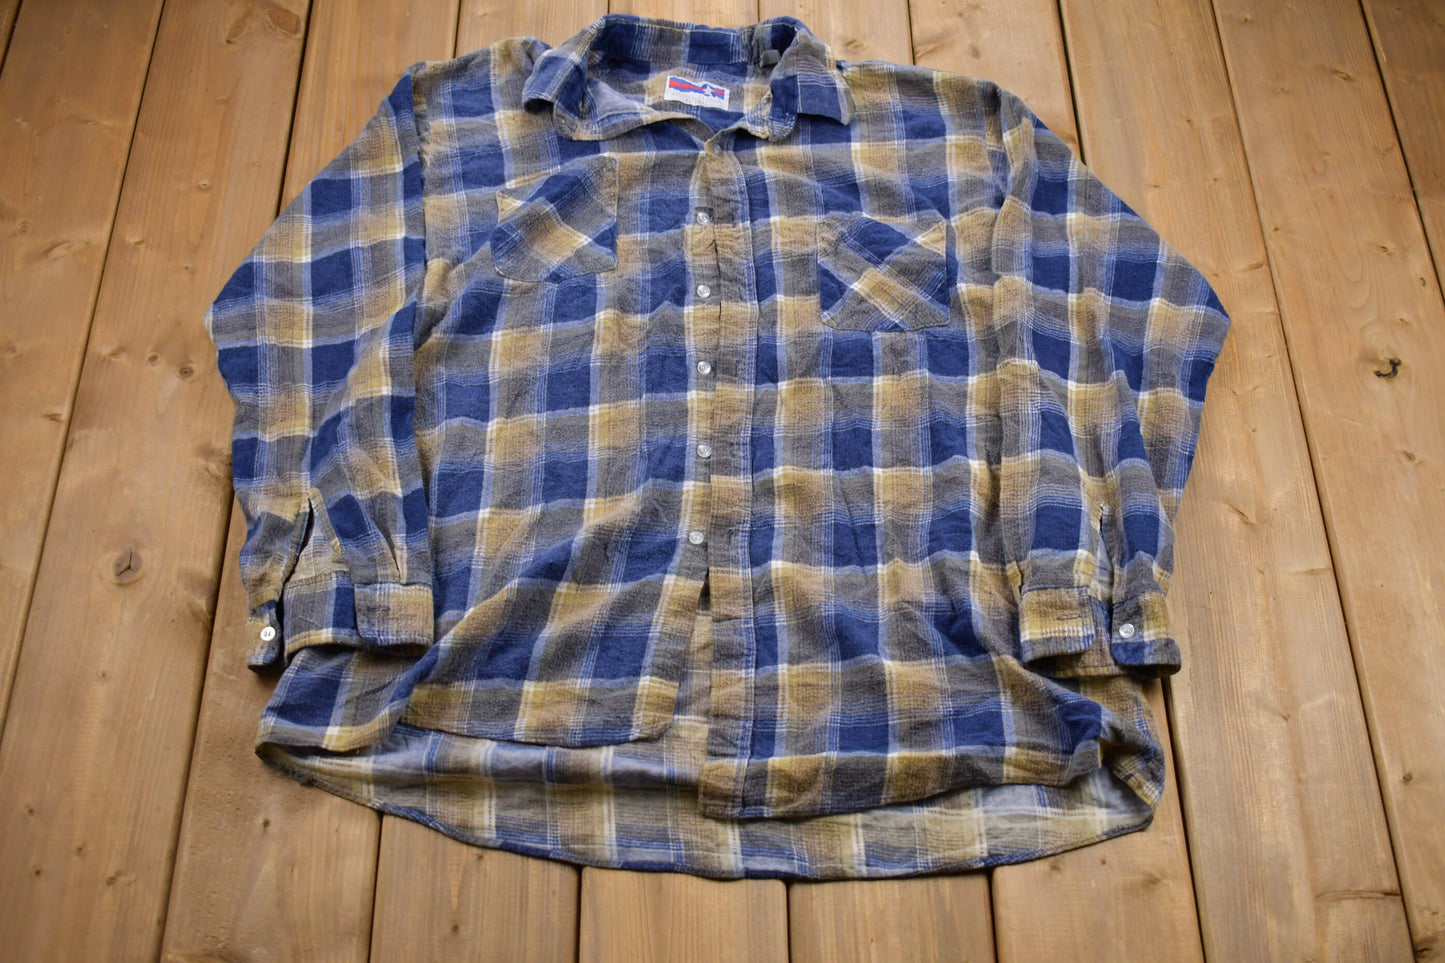 Vintage 1990s American Edition Plaid Button Up Shirt / 1990's Button Up / Vintage Flannel / Casual Wear / Workwear / Pattern Button Up